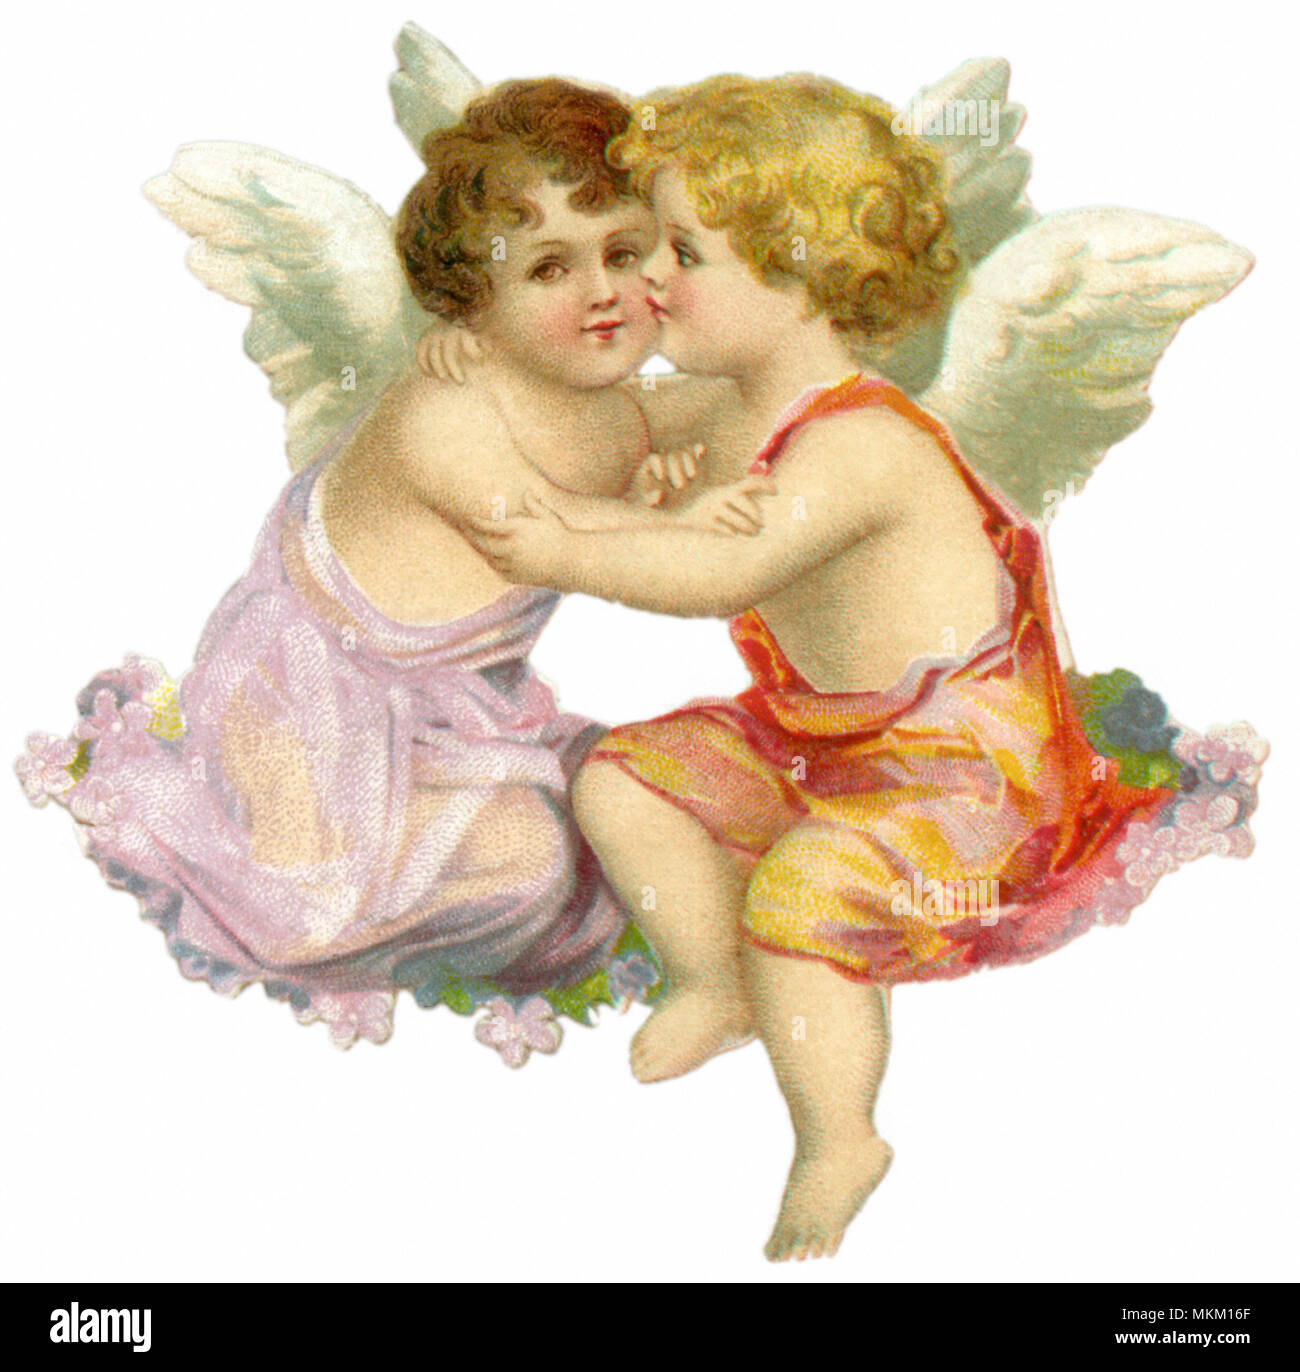 Image: Two cherubs embracing each other lovingly